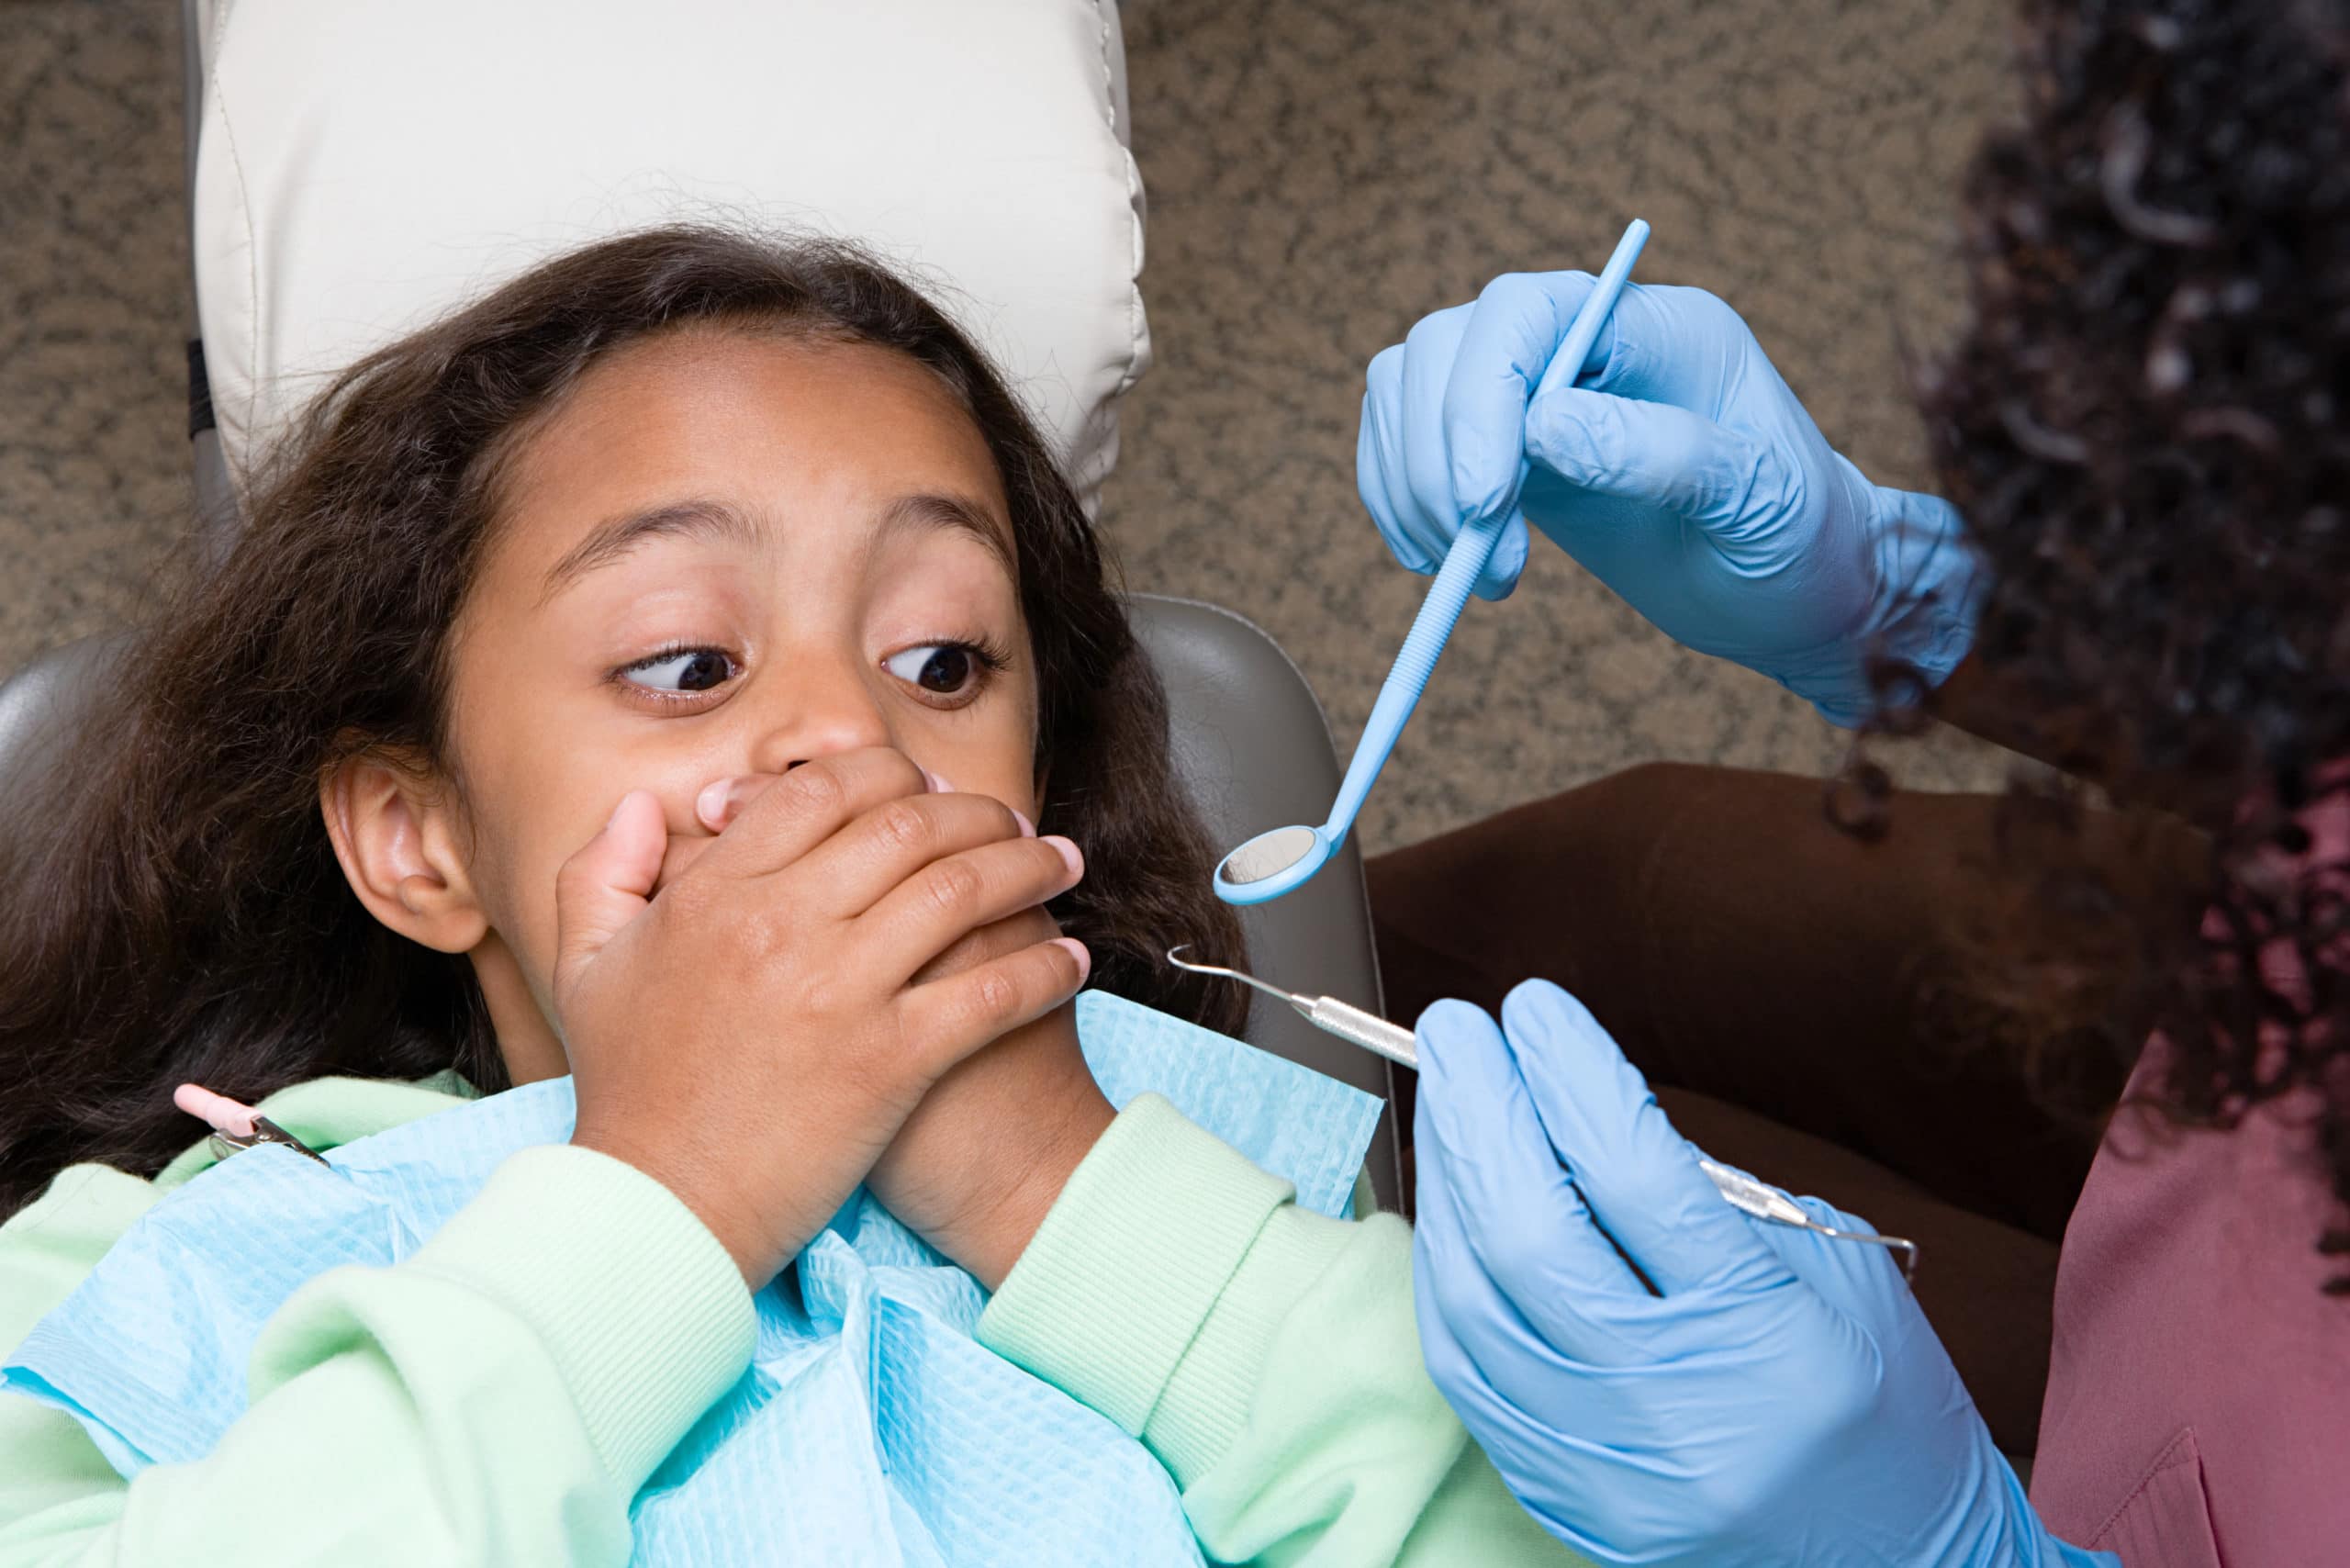 Helping Your Child Overcome Fear of the Dentist